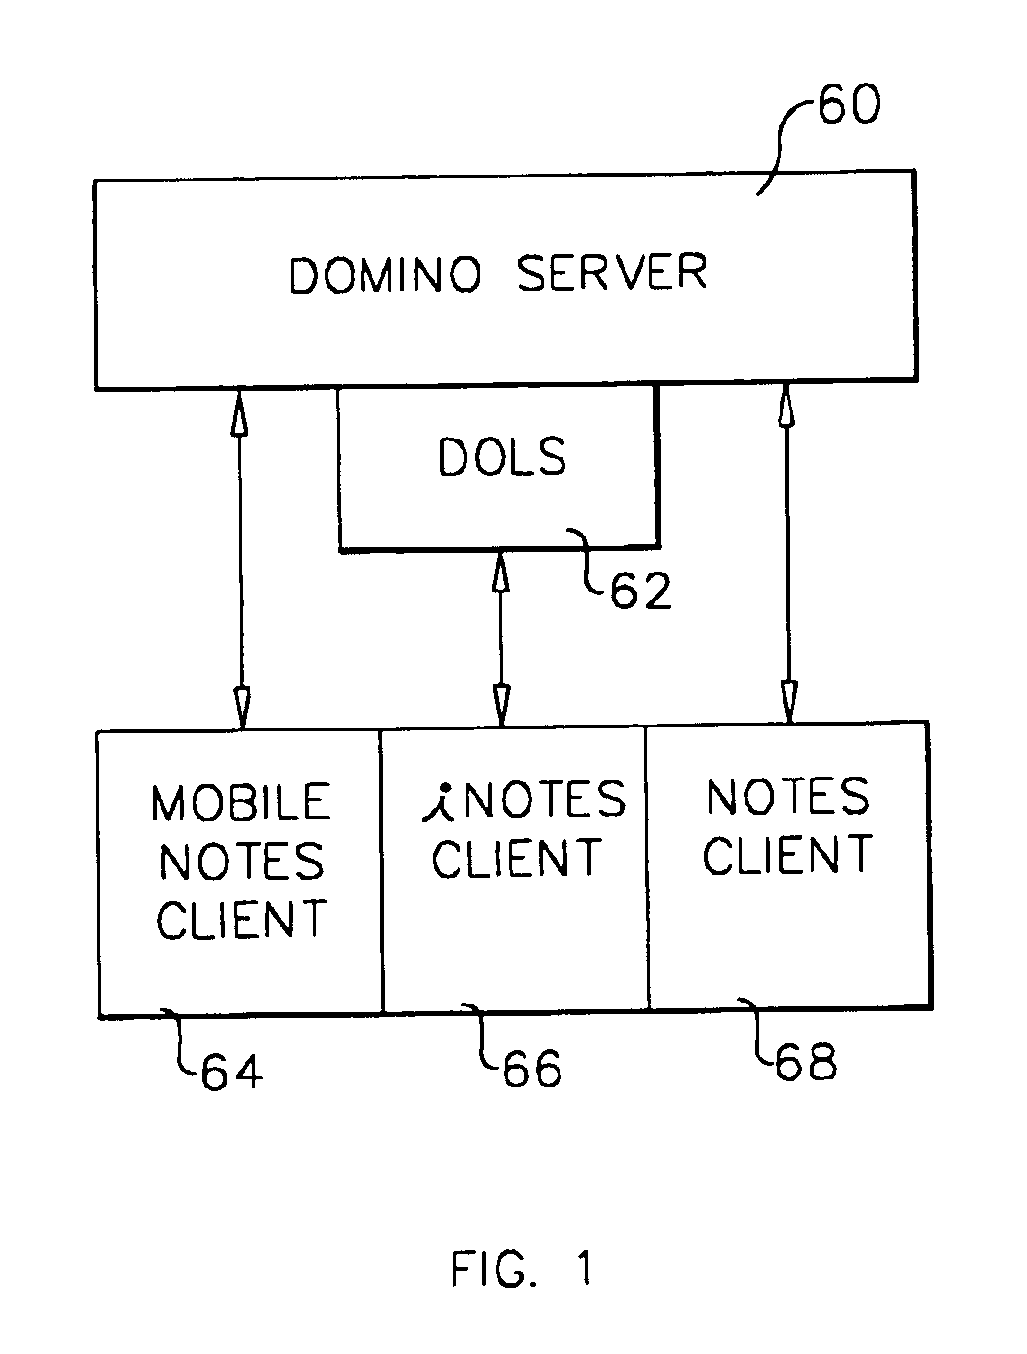 System and method for a web based trust model governing delivery of services and programs